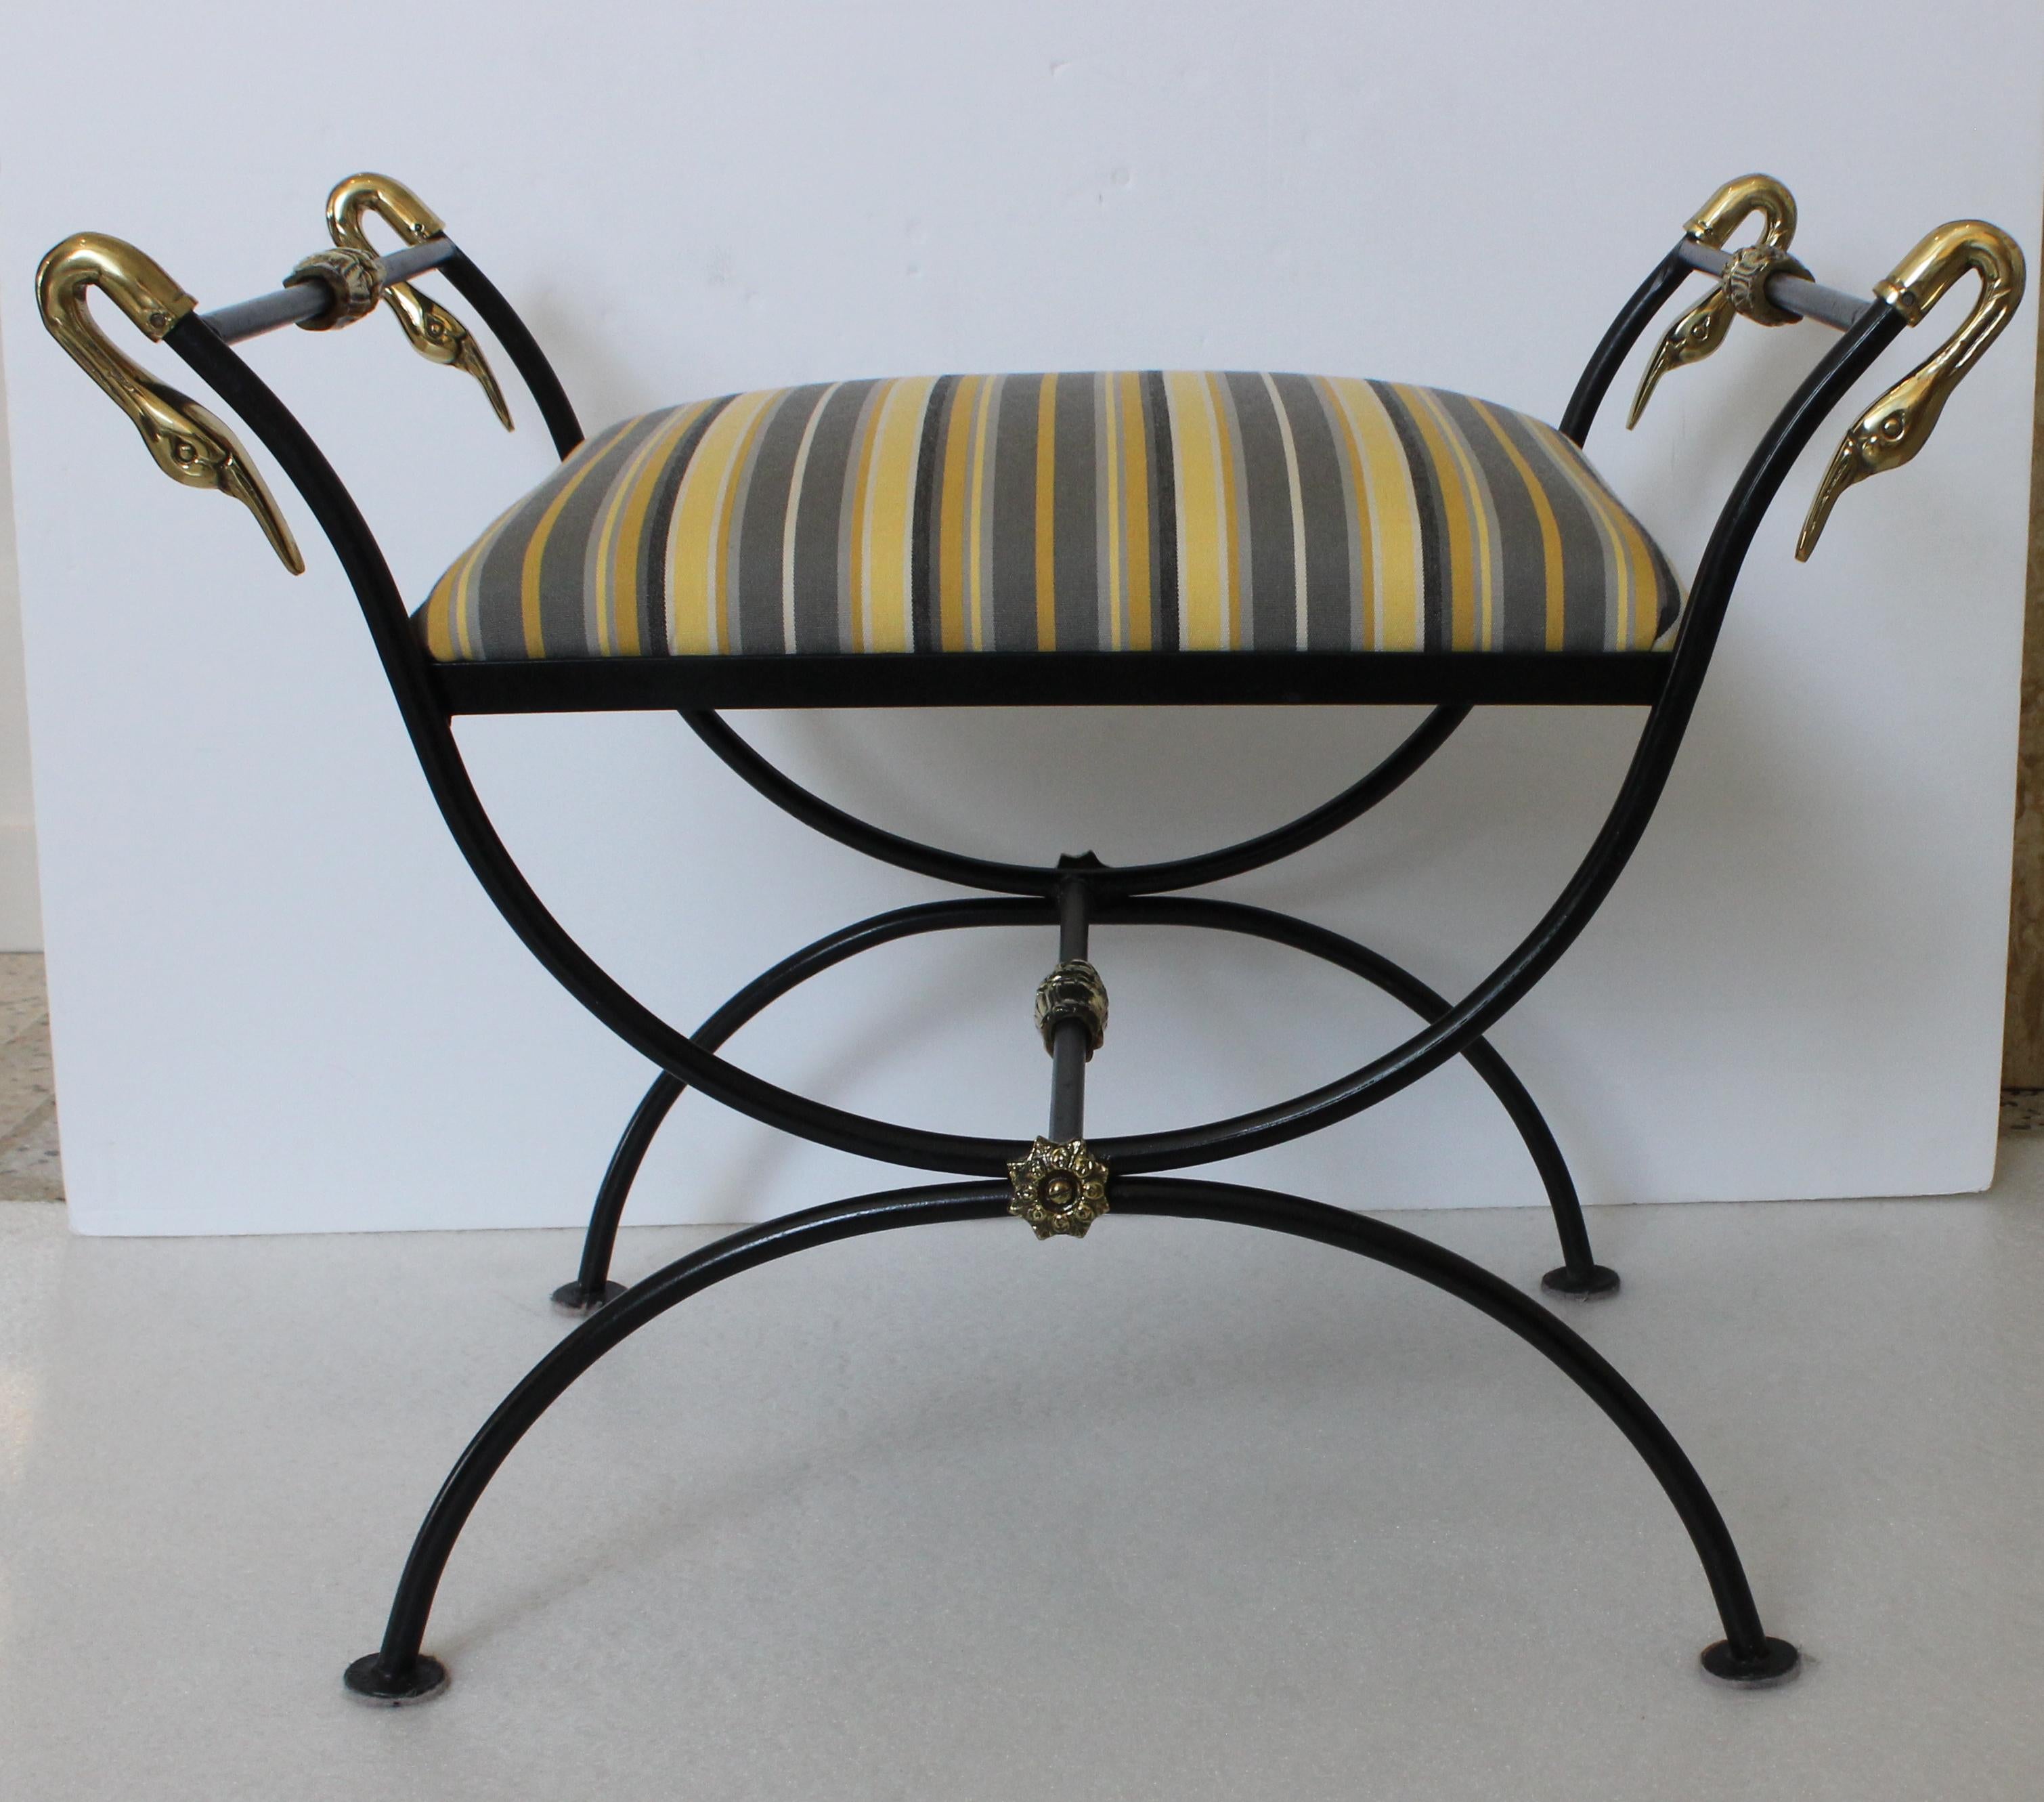 This stylish and chic Maison Jansen style bench is very much in the French Empire revival look with its curule-form, black frame and polished brass swan head and medallions.

Note: The seat cushion is not attached to the frame, and the four